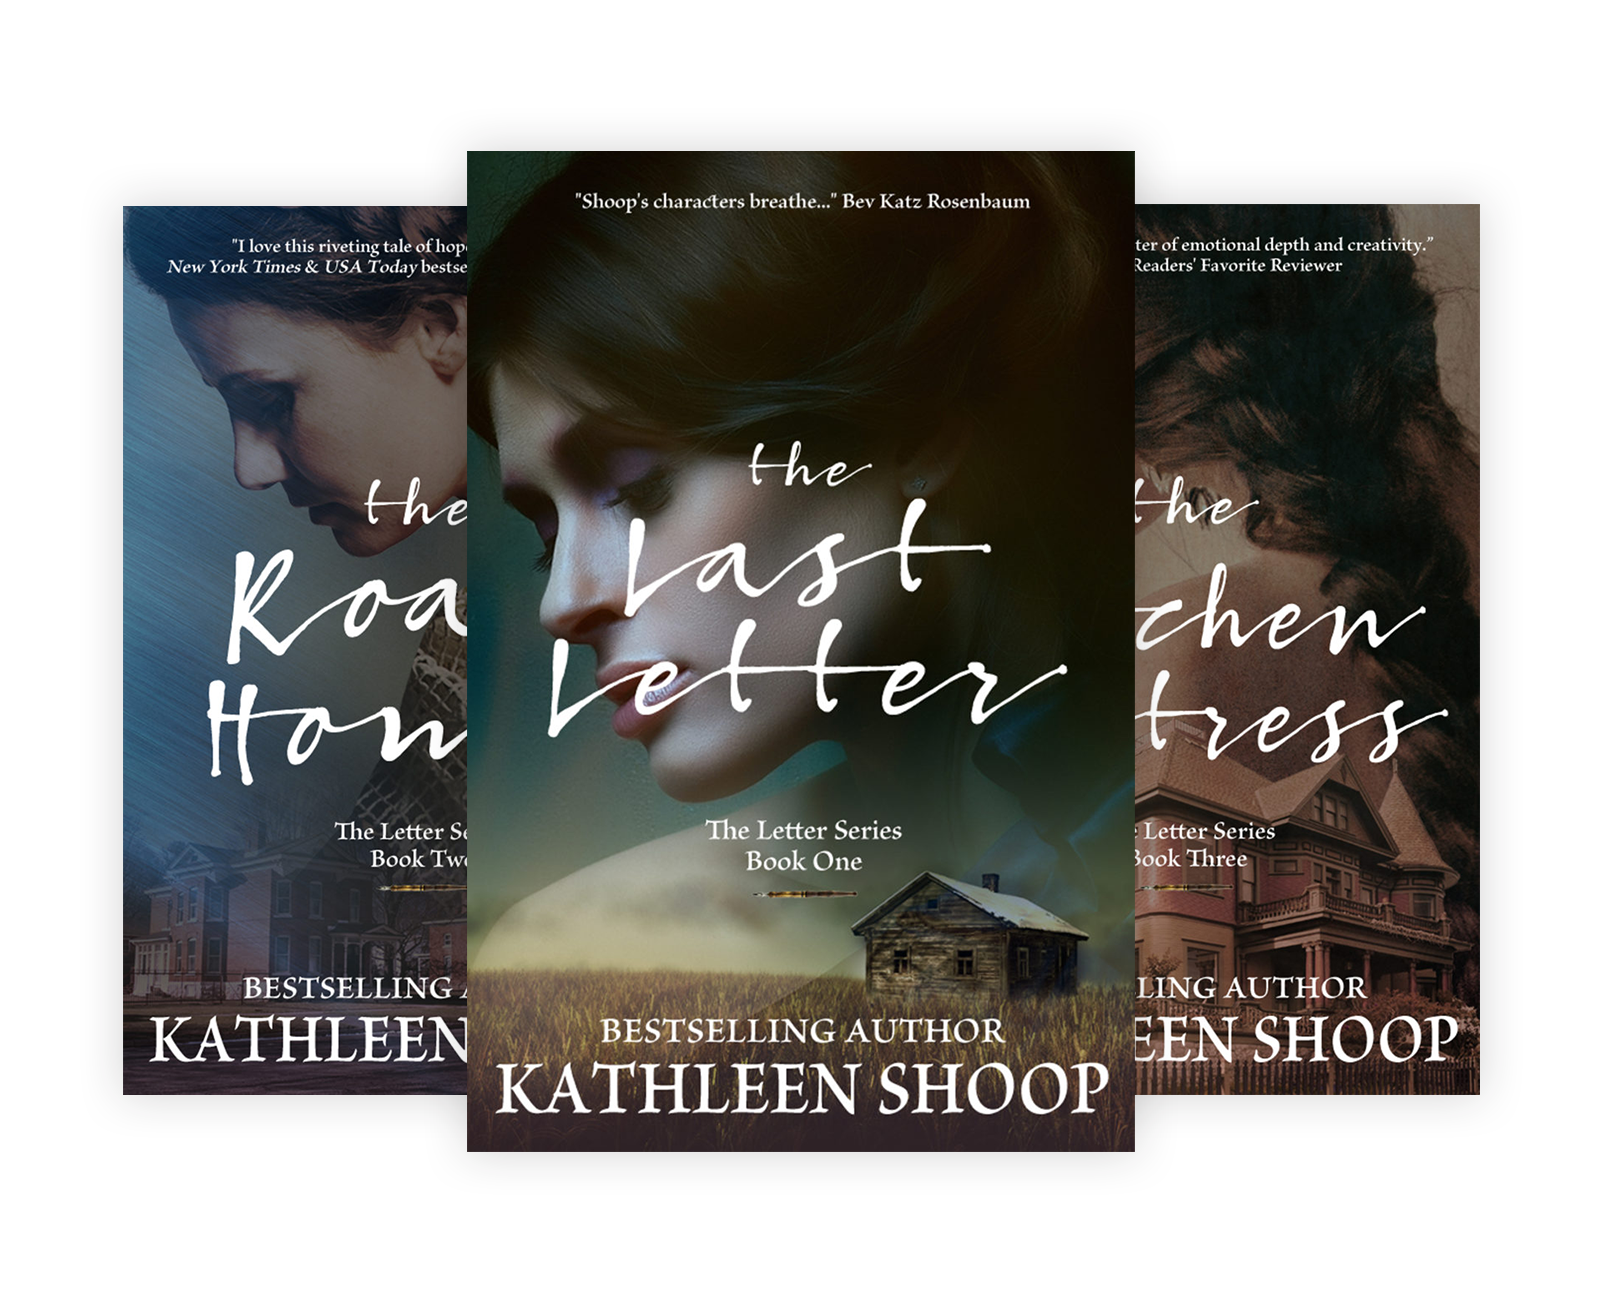 The Letter Series book covers